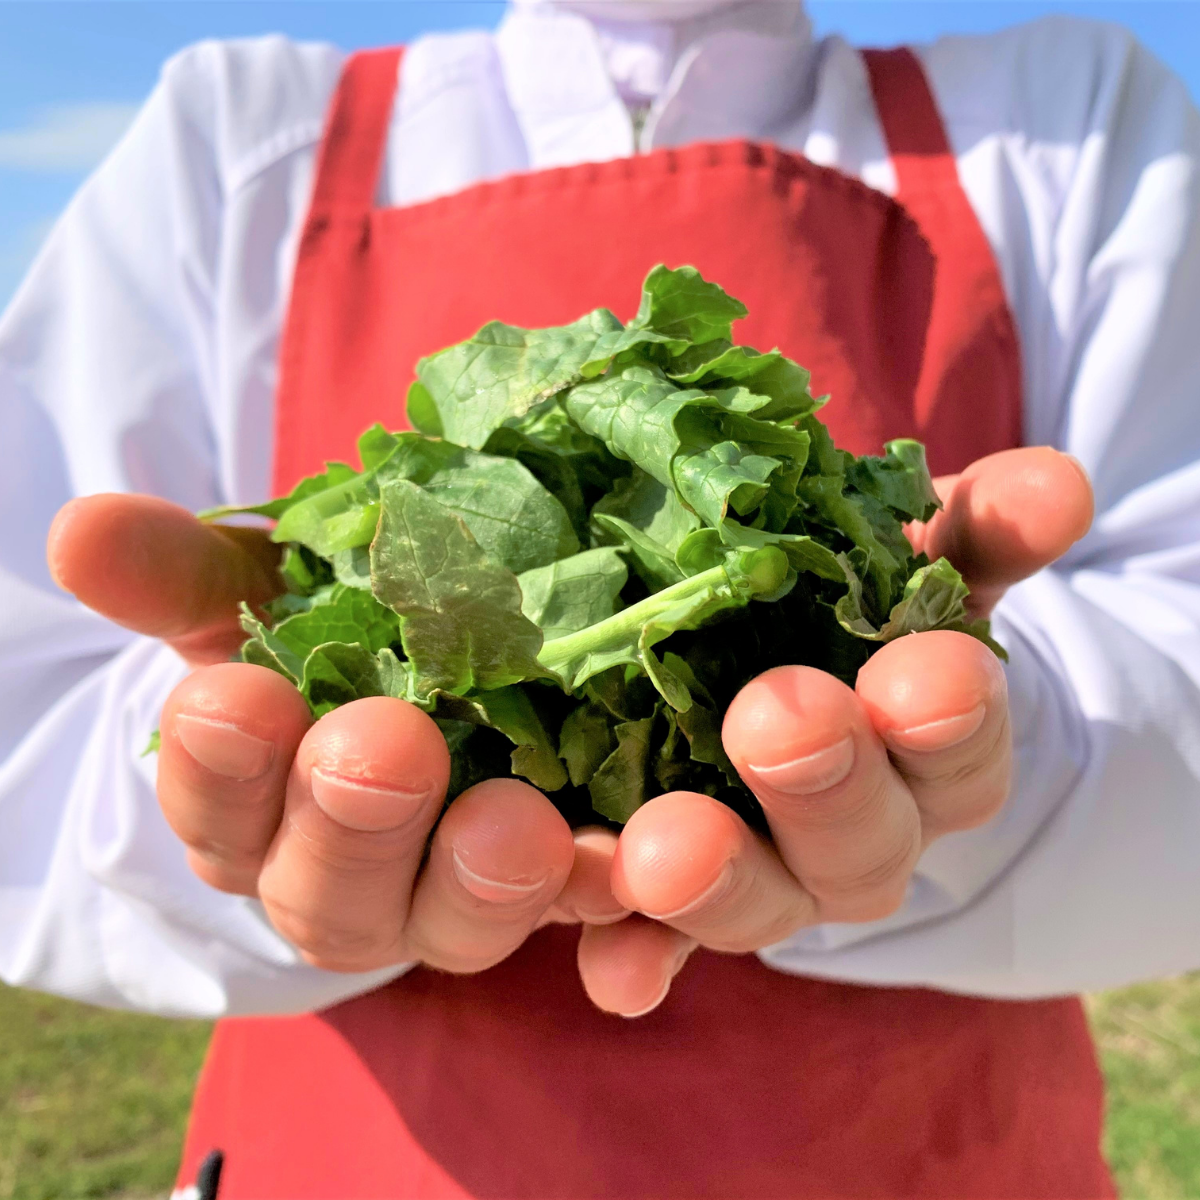 Man holding vegetable greens with both hands